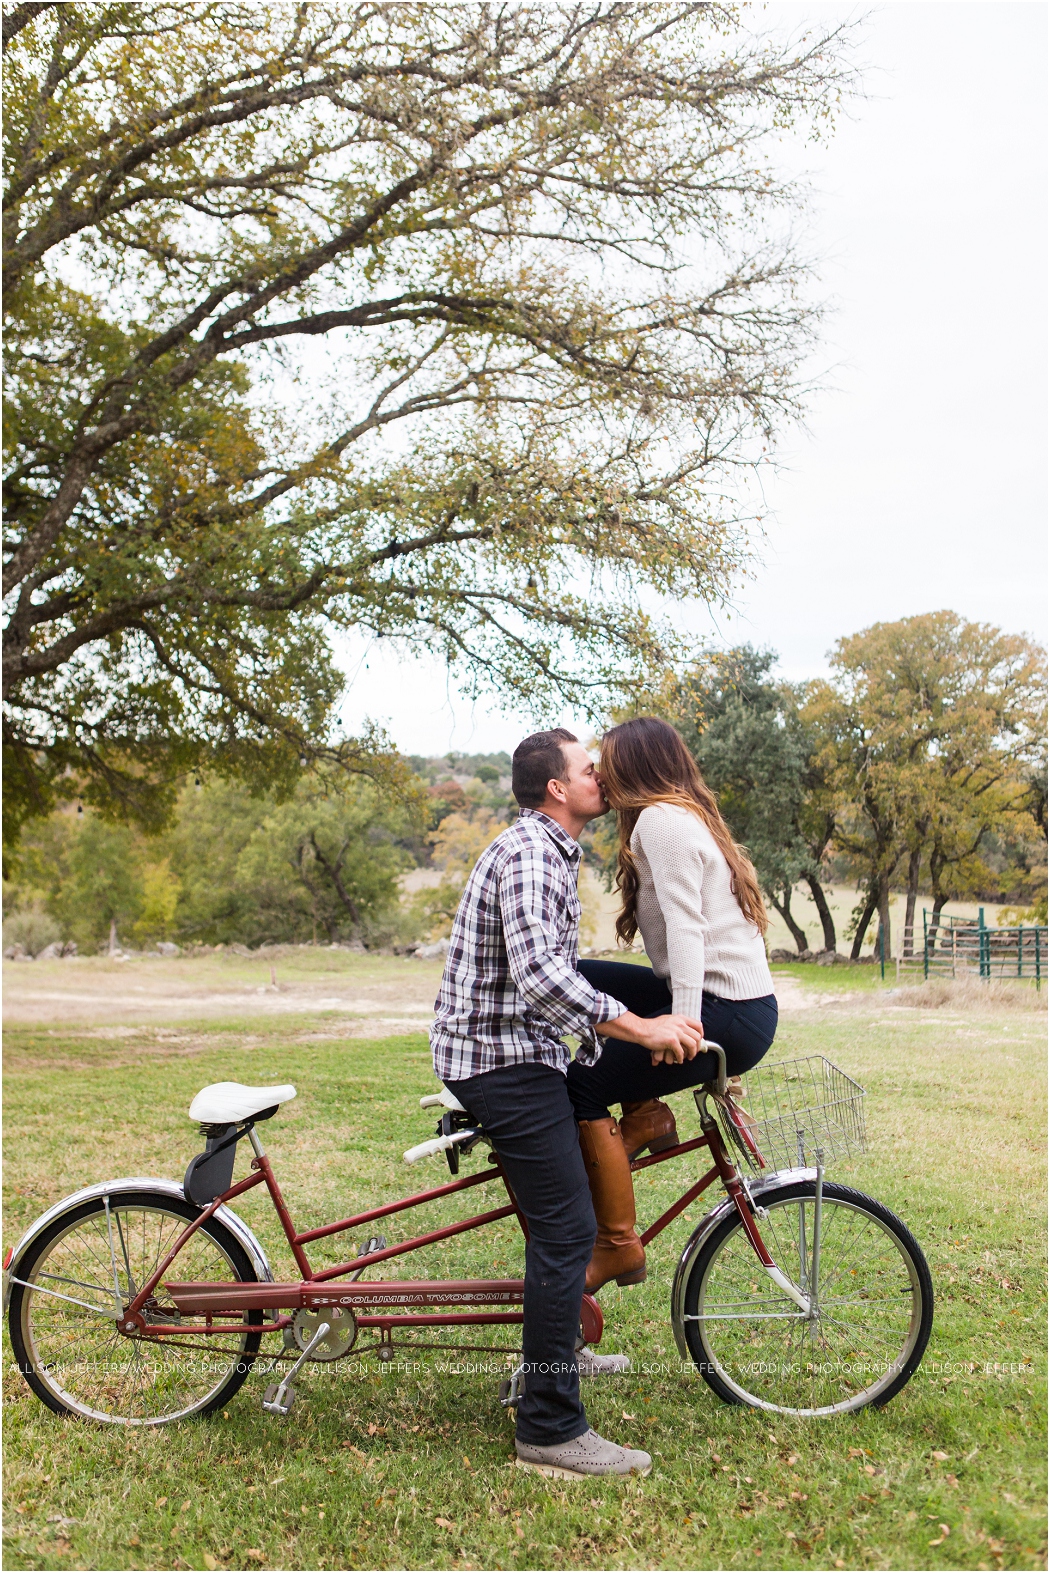 CW Hill Country Ranch Engagement Session San Antonio Wedding Photographer Boerne Wedding Photographer Fredericksburg Wedding Photographer boerne, Texas CW Hill Country Ranch Wedding Venue Engagement session_0010